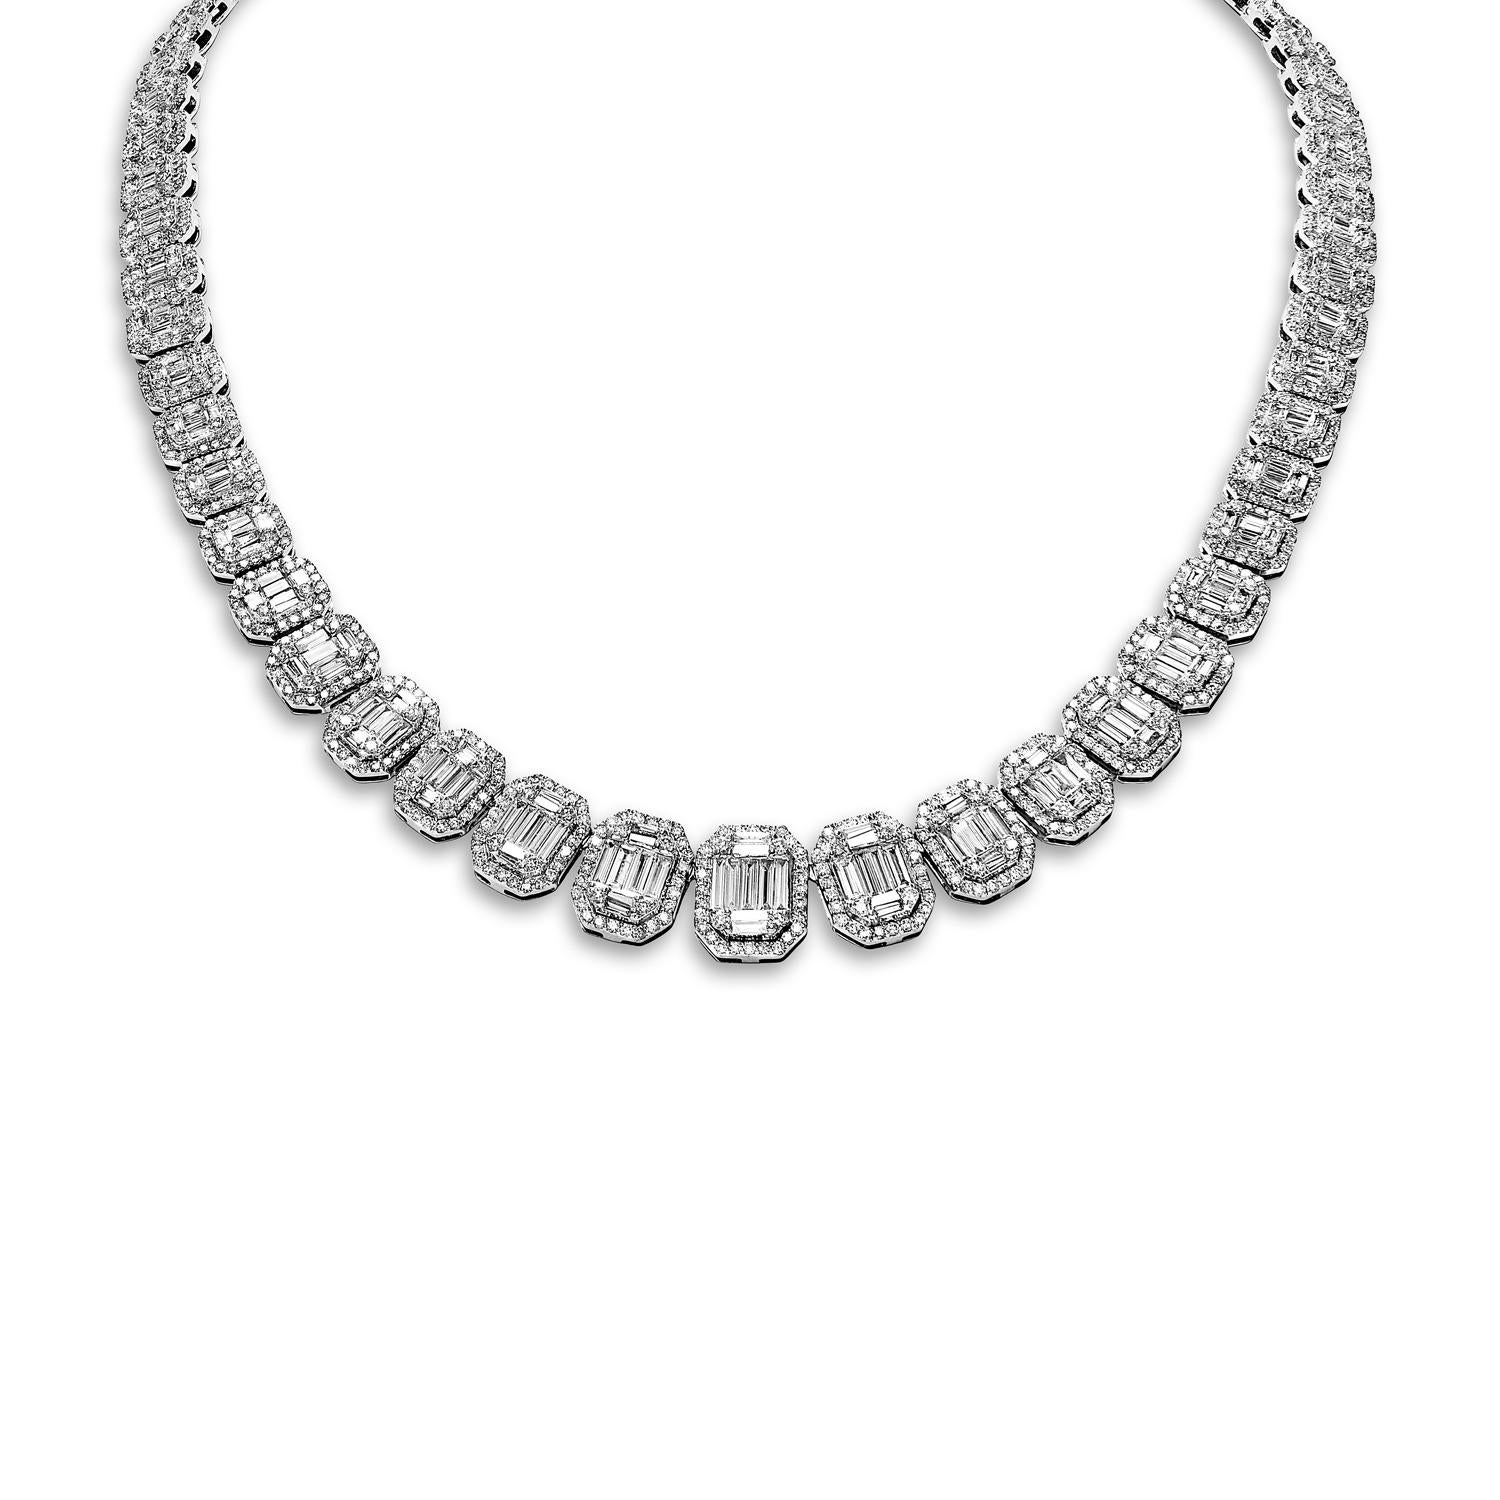 Looking for a luxurious and elegant diamond necklace for that special person in your life? Look no further than an earth-mined emerald-cut diamond necklace set in stunning 14-karat white gold. With its classic and timeless style, this necklace is